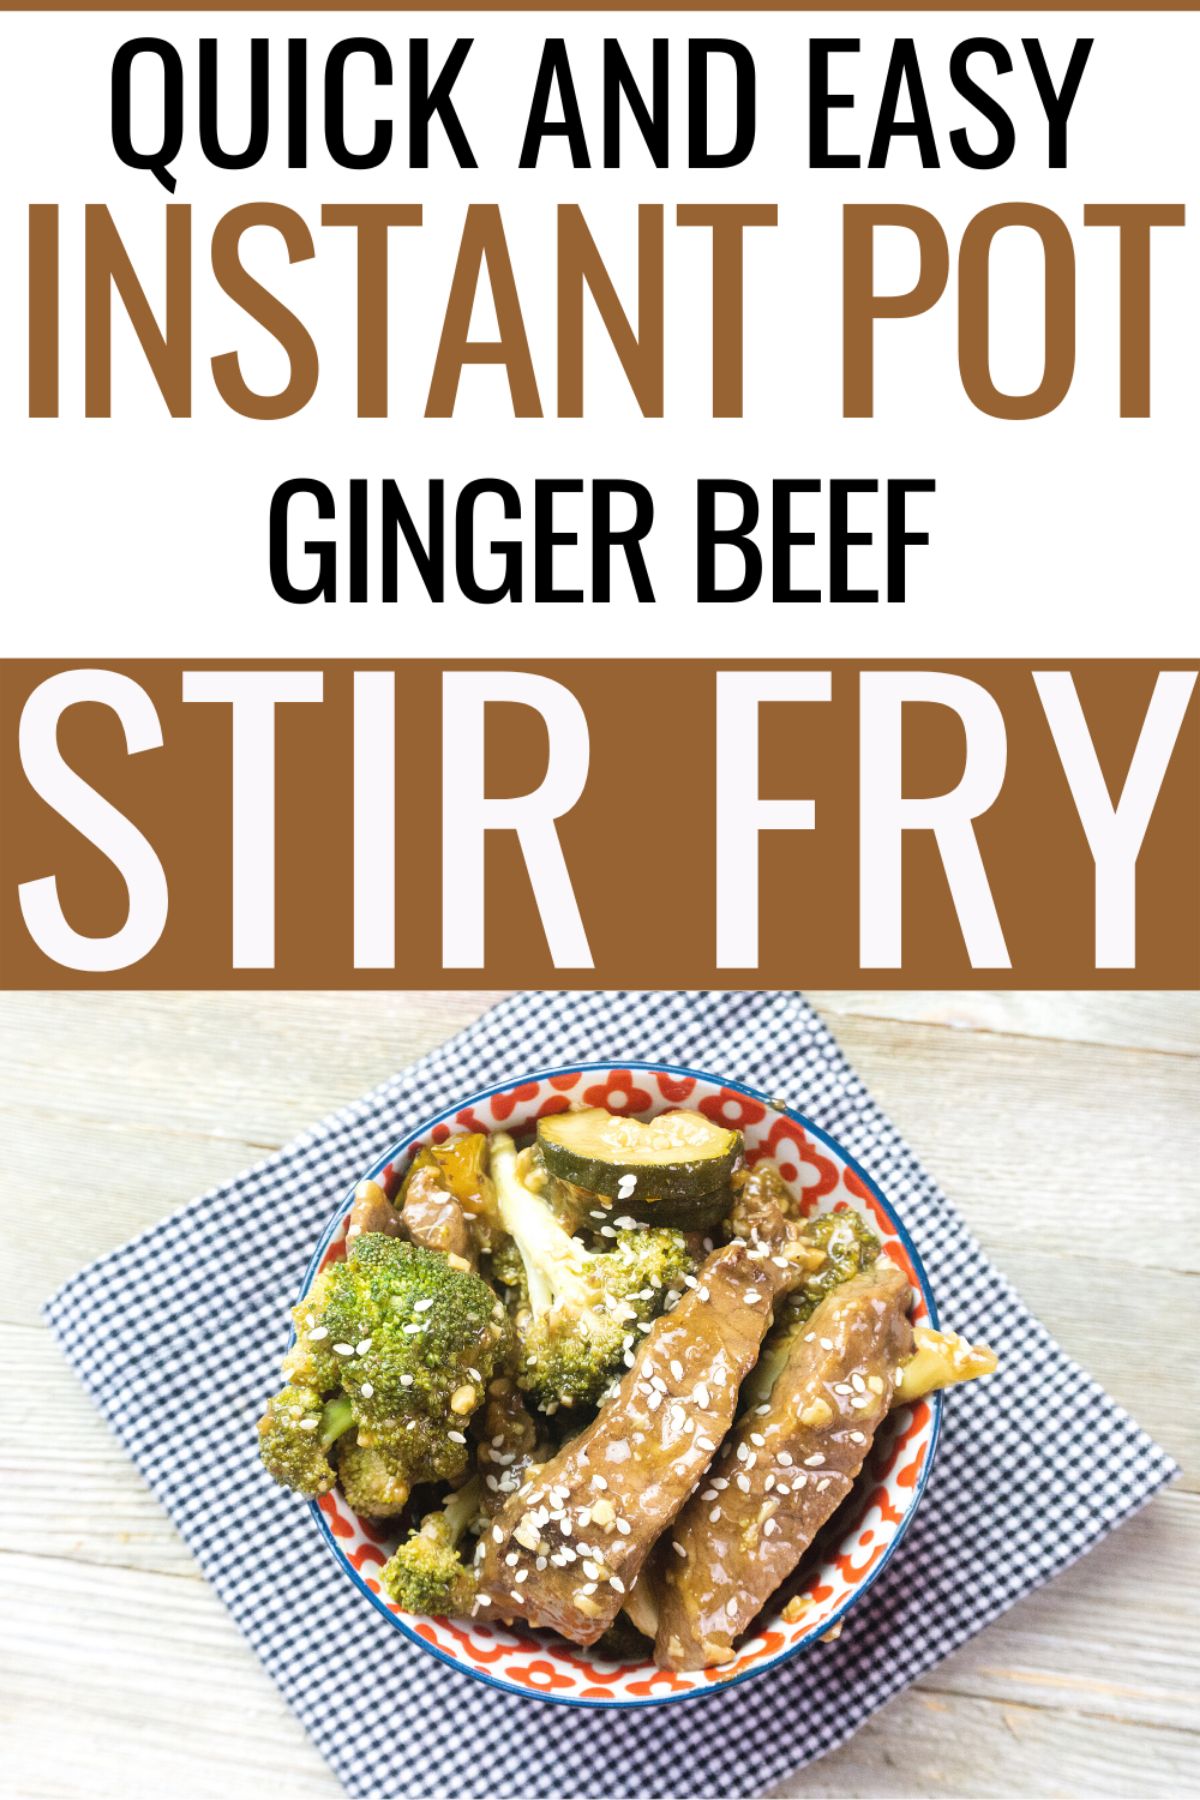 Instant Pot Ginger Beef Stir Fry in a bowl on a checkered cloth with a large text at the upper part of the image saying "Quick and Easy Instant Pot Ginger Beef Stir Fry"